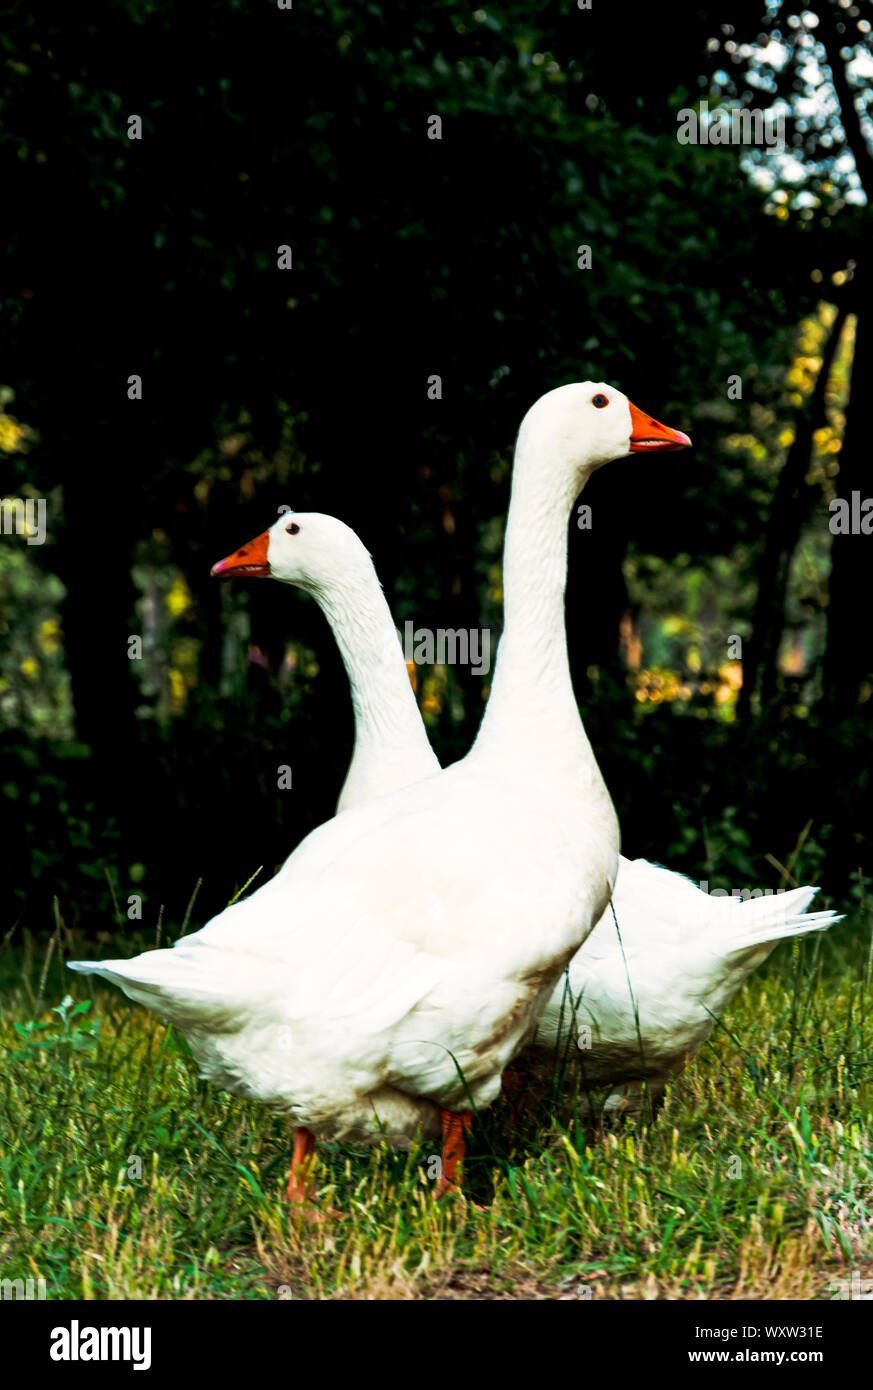 Two white domestic goose standing side by side facing in opposite directions in a grassy field with woodland trees in a close up low angle view Stock Photo